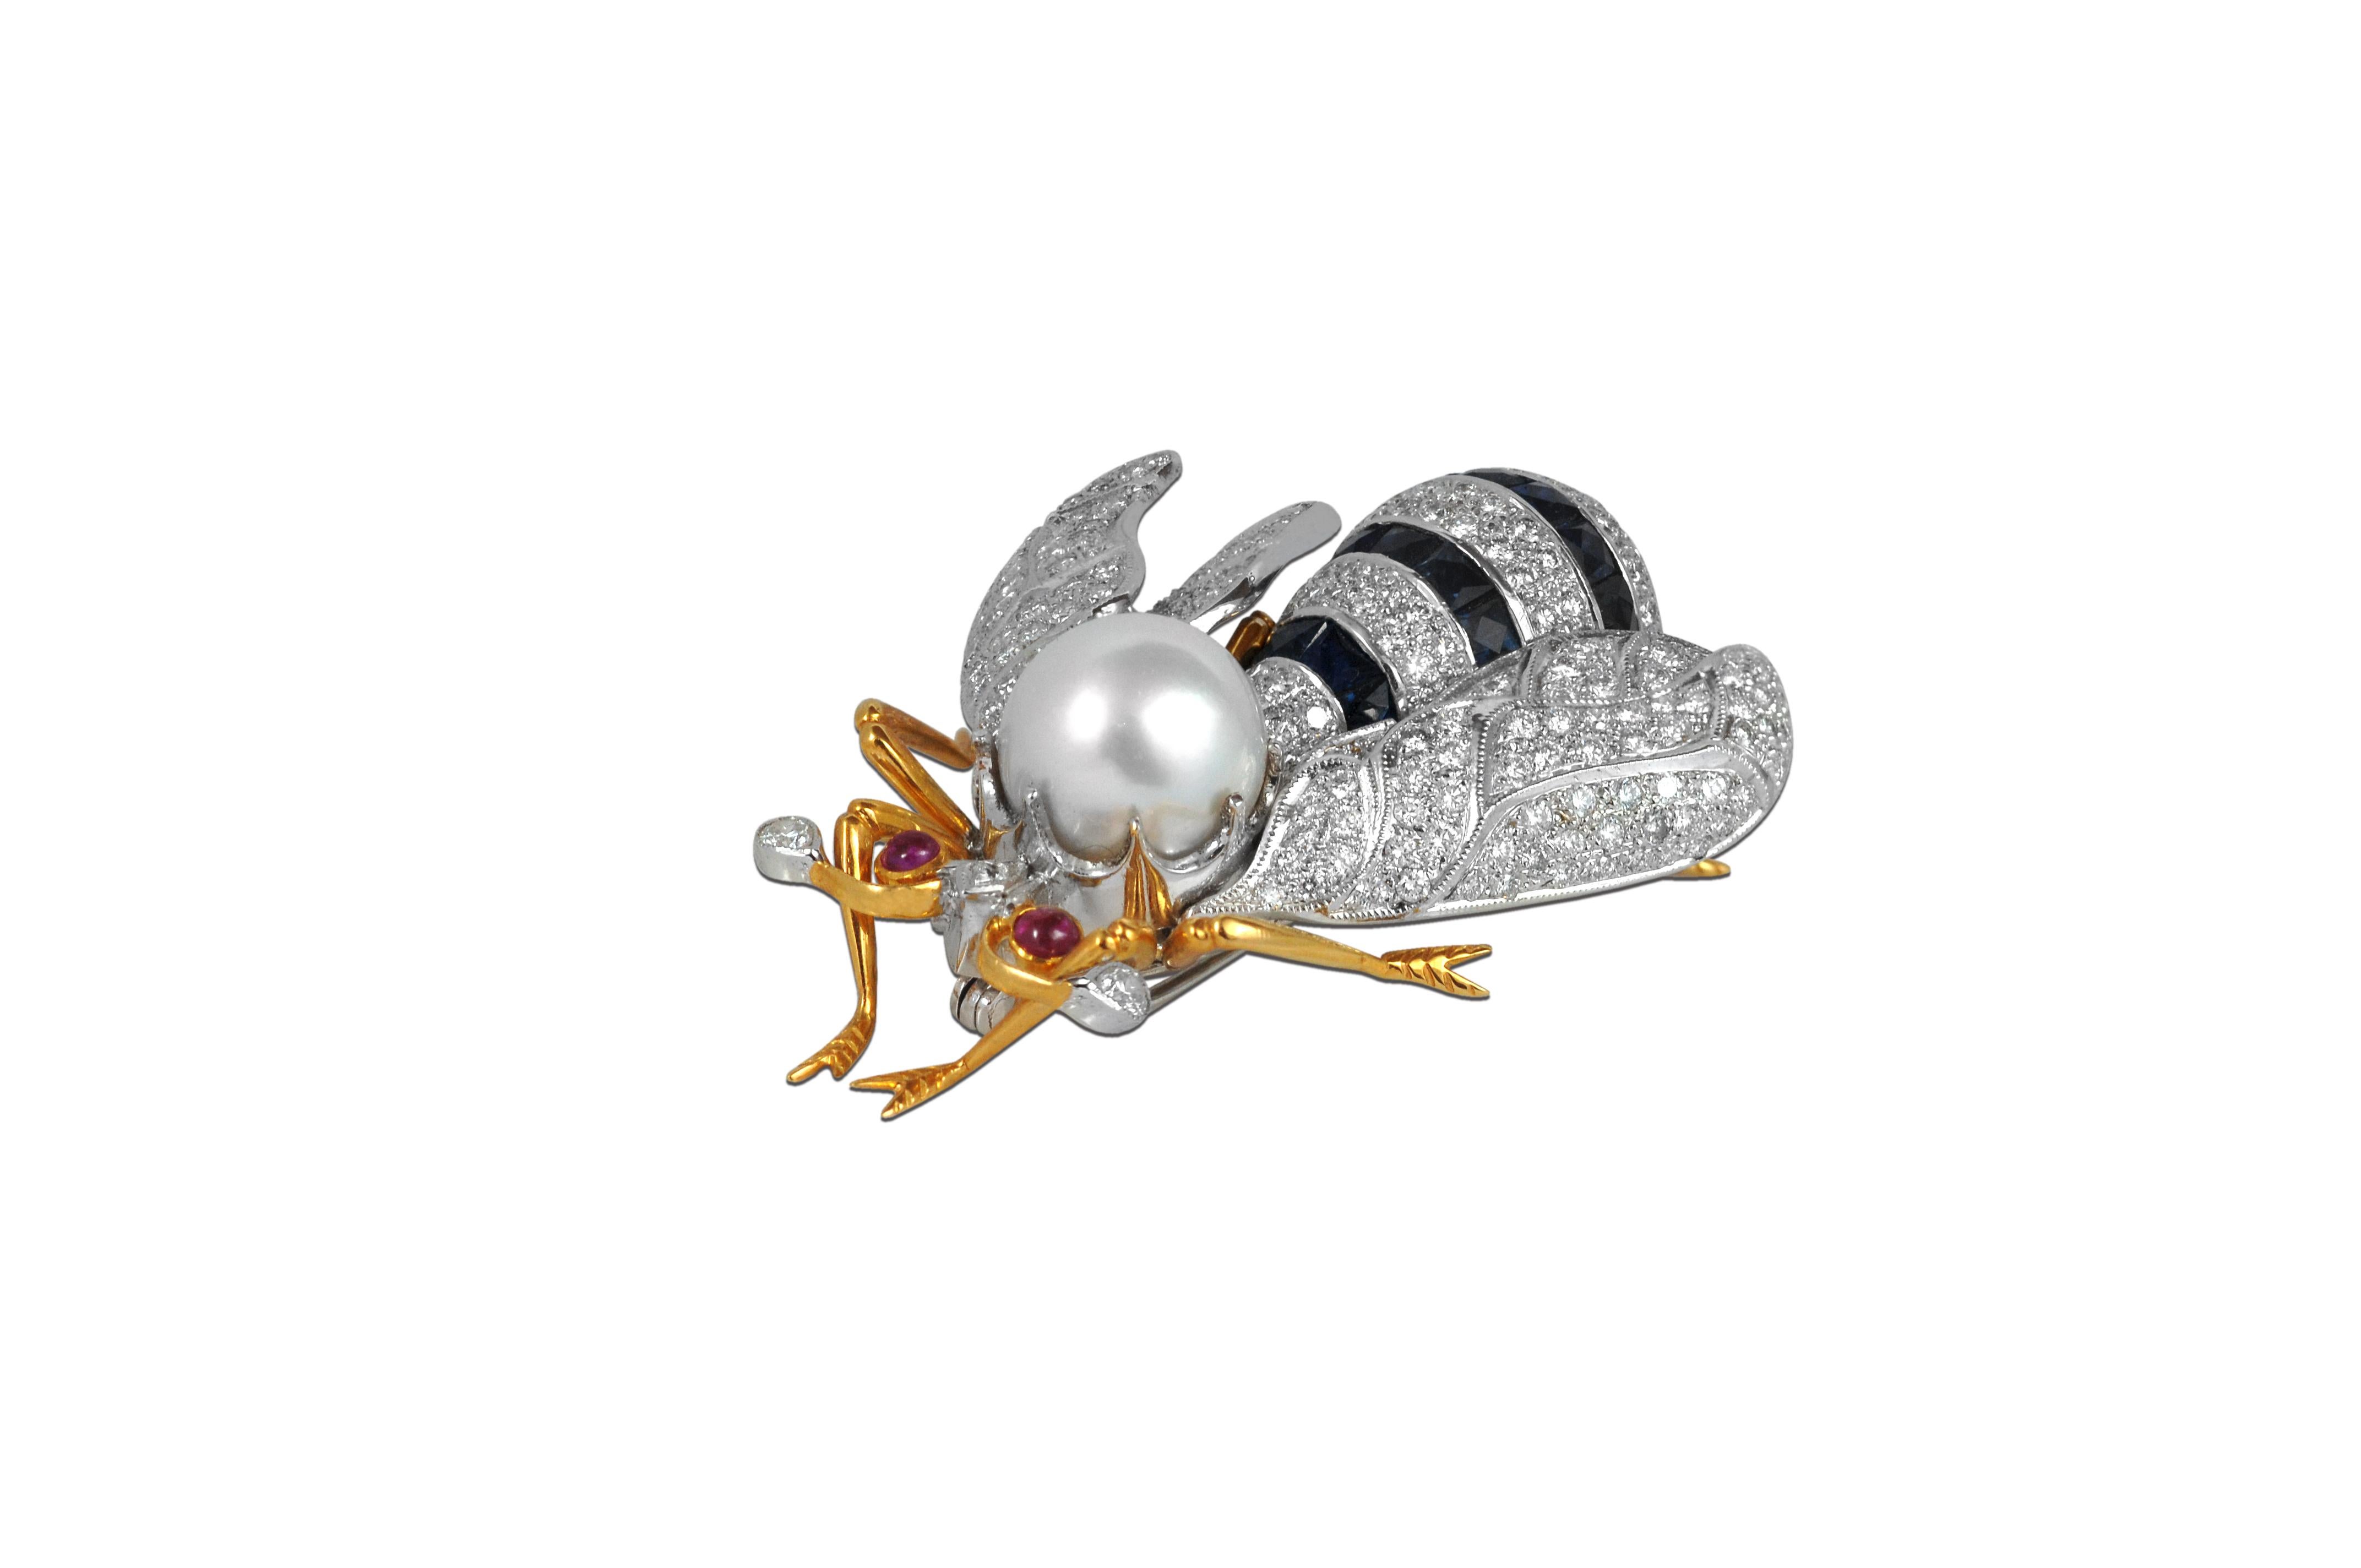 For all Bee lovers, you are staring at a South Sea Pearl, Blue Sapphire 10.96 carats, Diamond 3.44 carats with Cabuchon Ruby 0.22 carat Brooch set in 18 Karat White Gold Settings

Width: 4.3 cm
Length: 5.1 cm 


